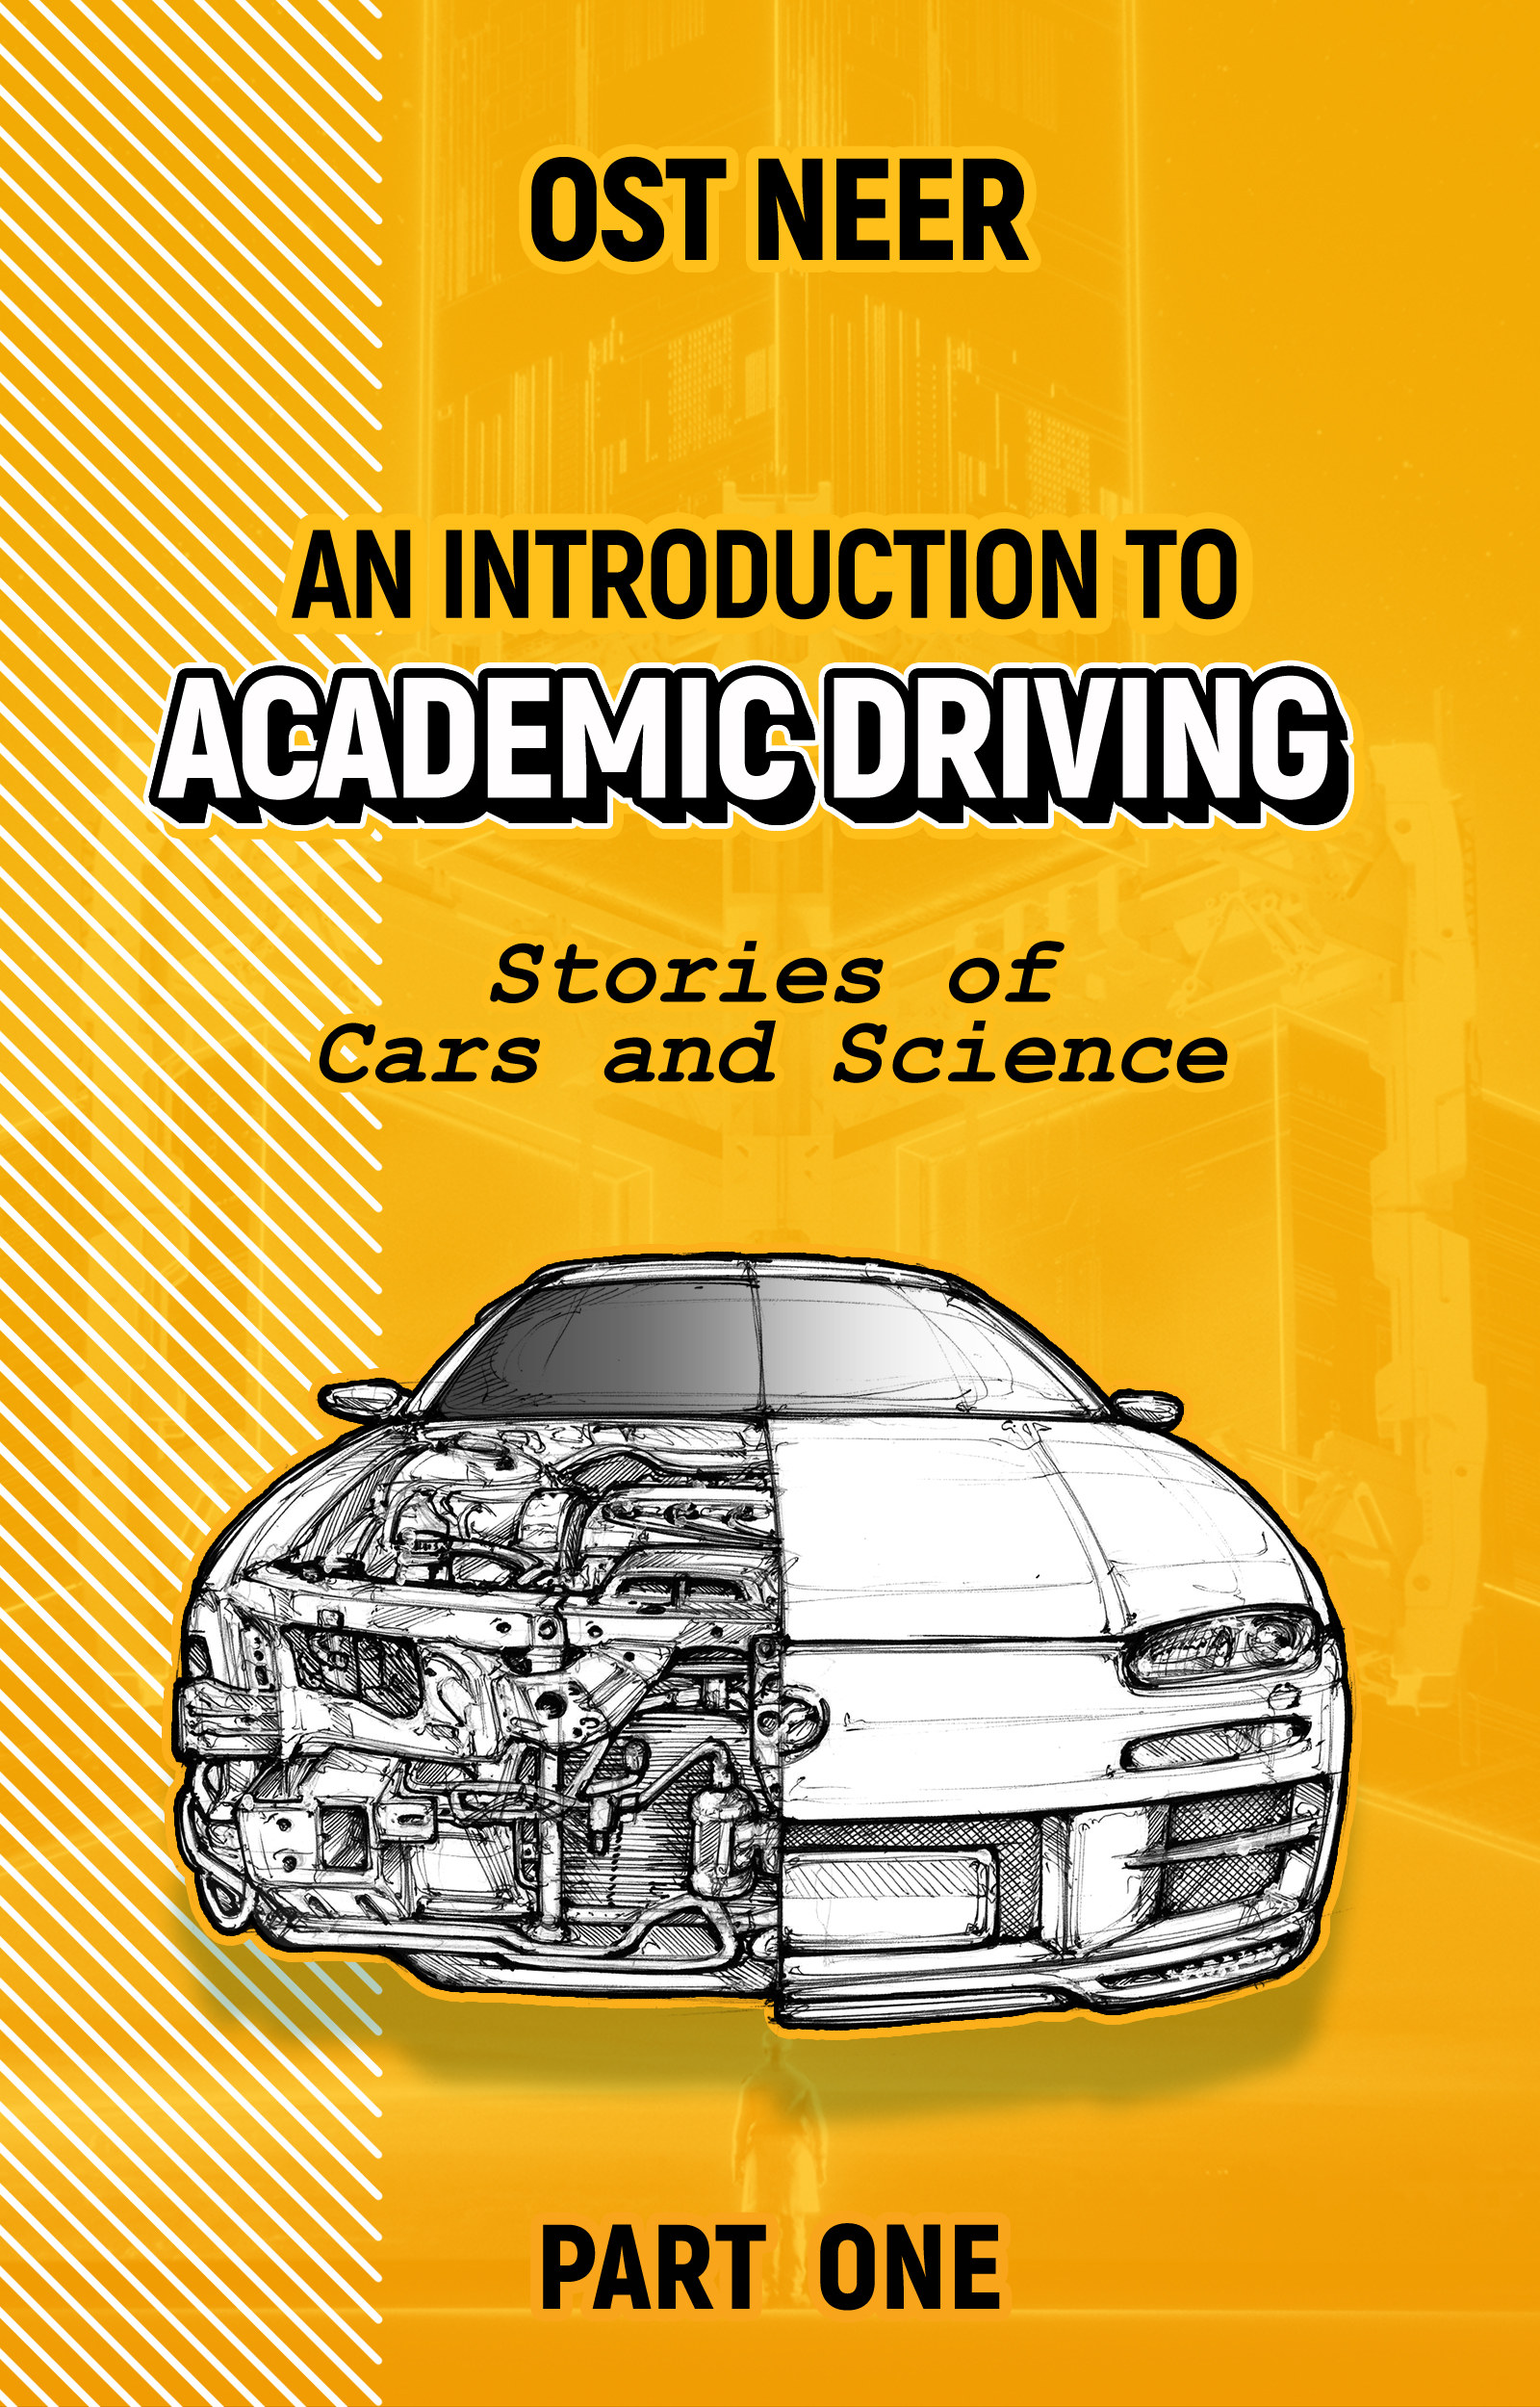 FREE: An Introduction to Academic Driving: Stories of Cars and Science (Part One) by Ost Neer